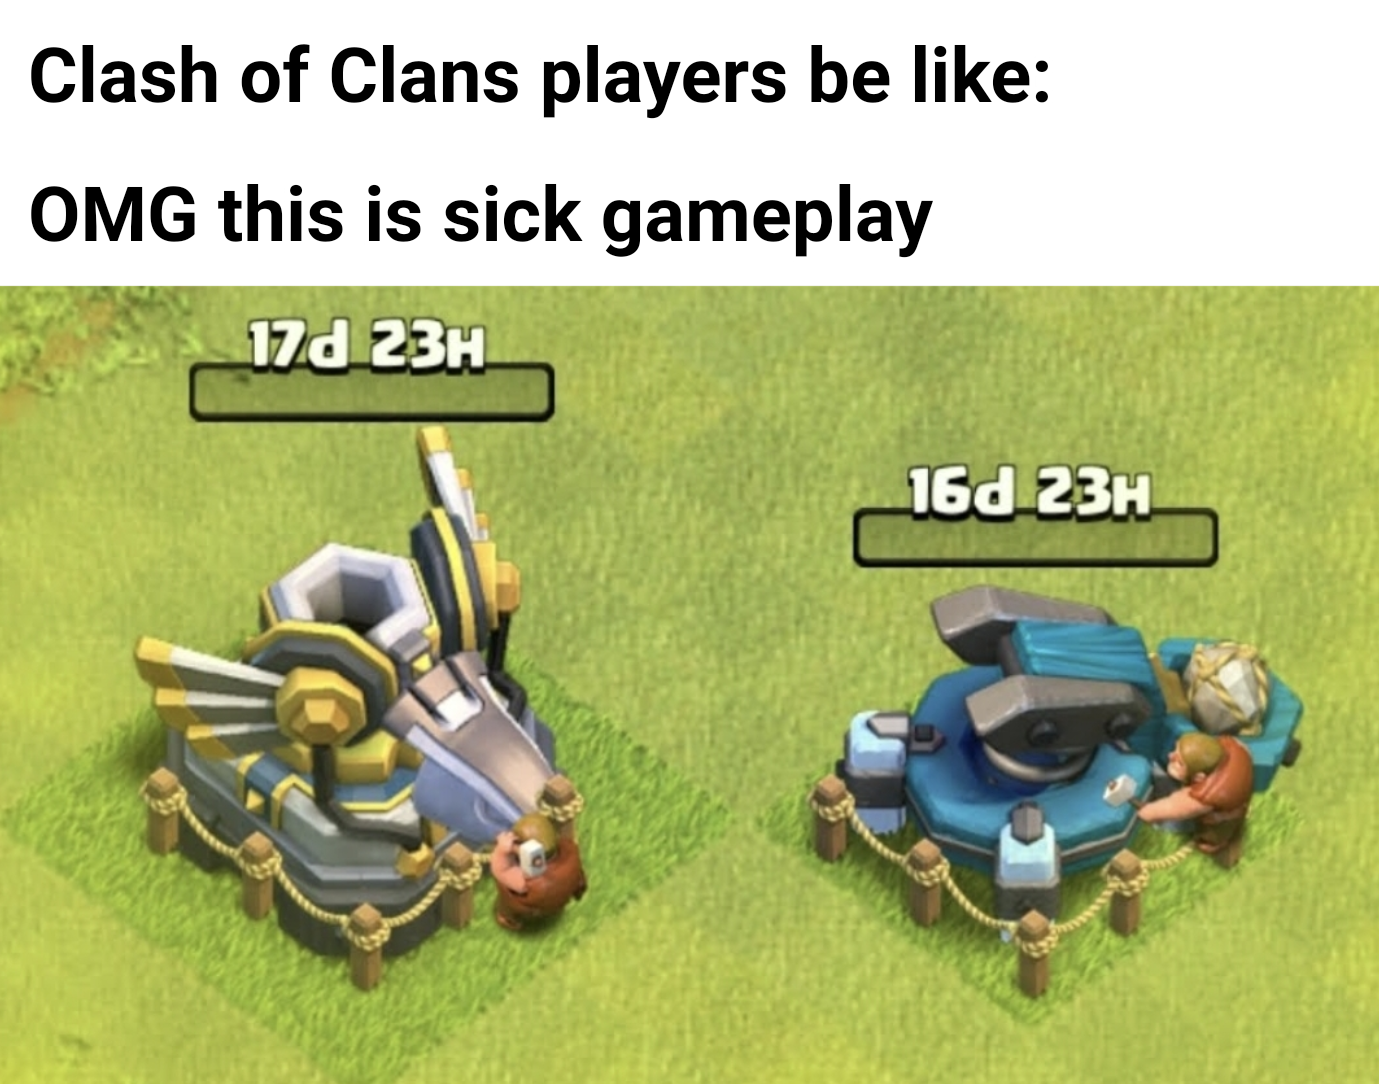 funny memes - dank memes - memes on coc - Clash of Clans players be Omg this is sick gameplay 17 d 23H 160 23H